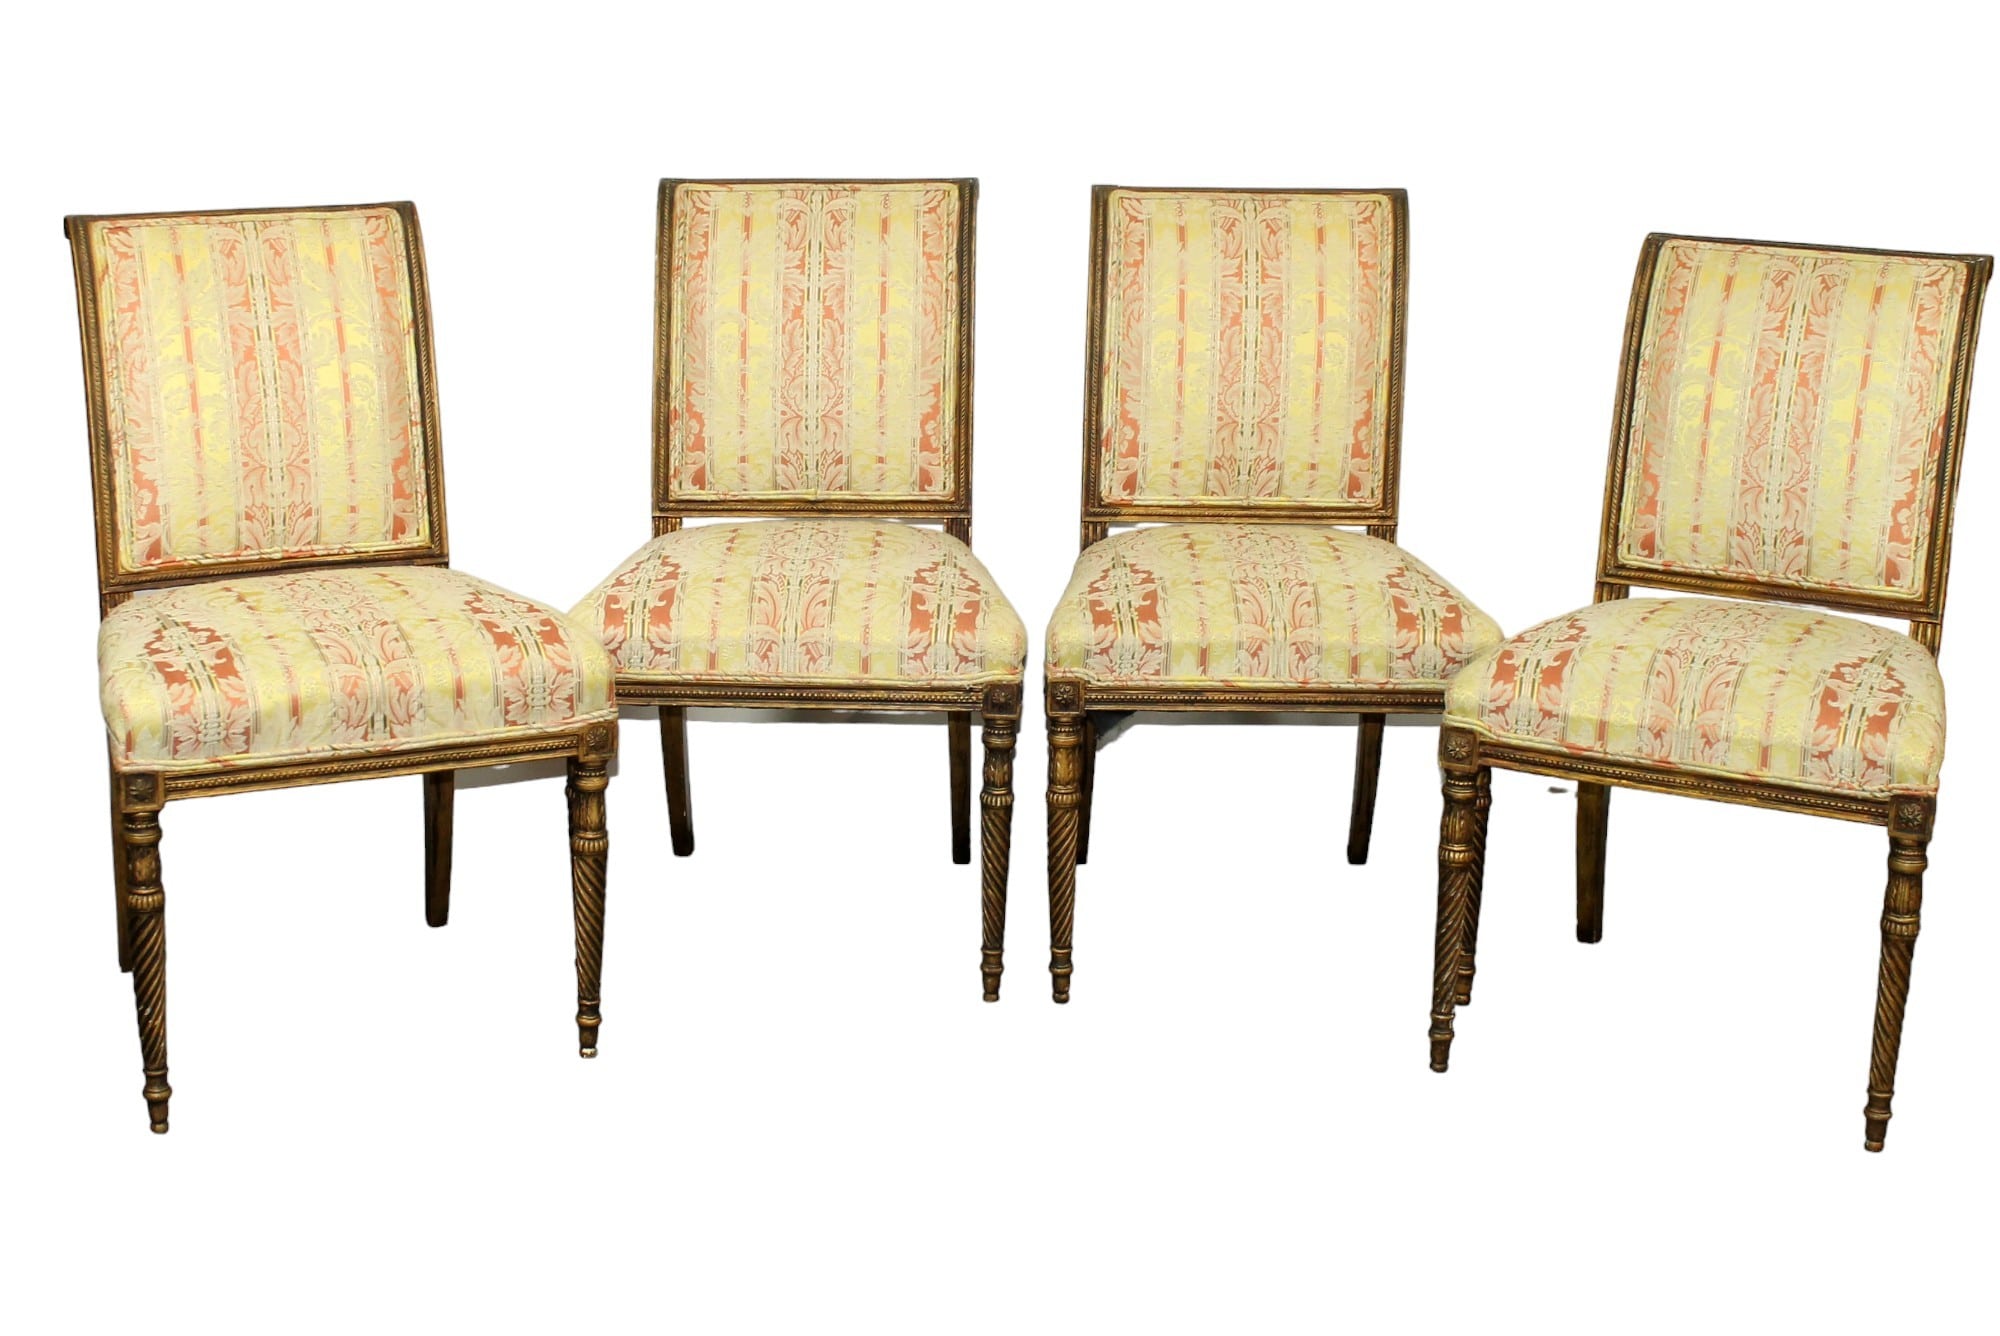 Lot of 4 French Louis XVI giltwood side chairs